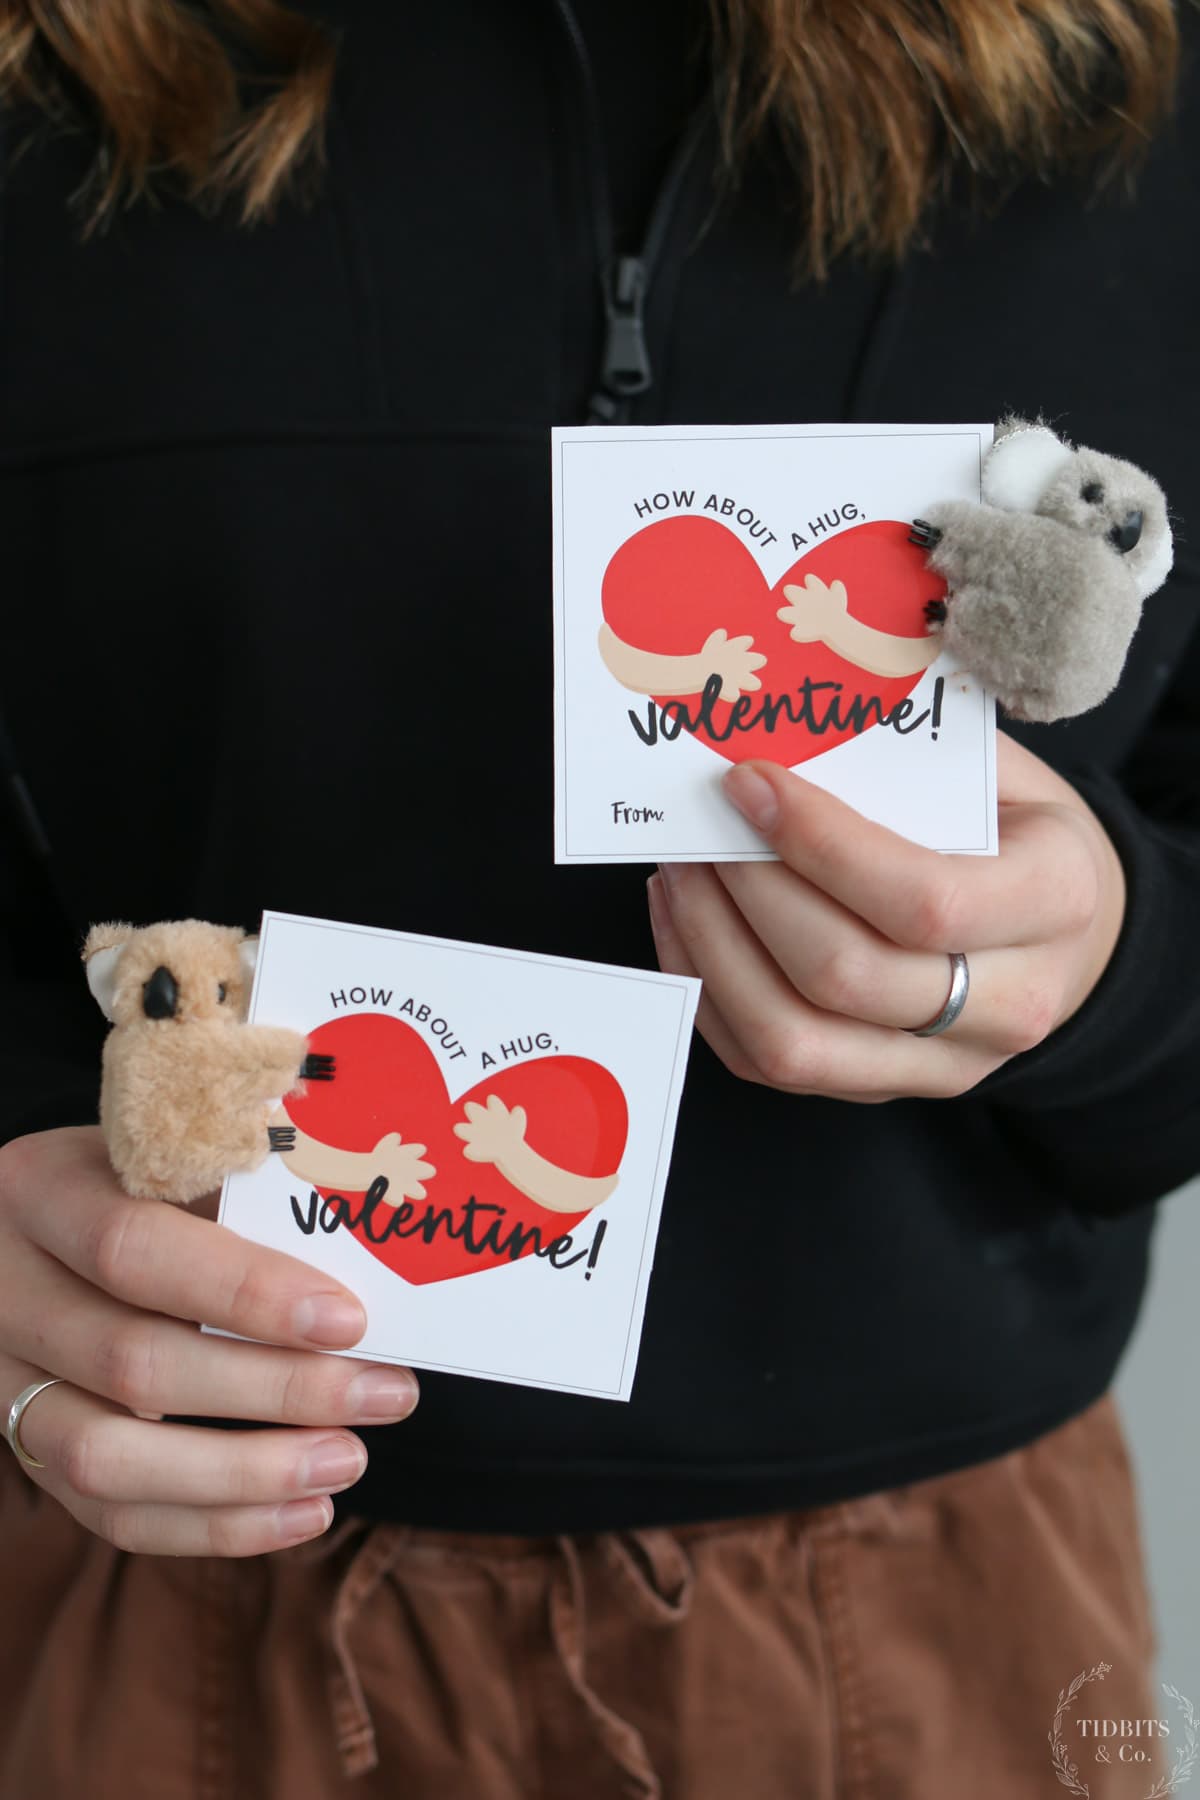 A girl holds "How About a Hug, Valentine!" cards with small animal clips on them